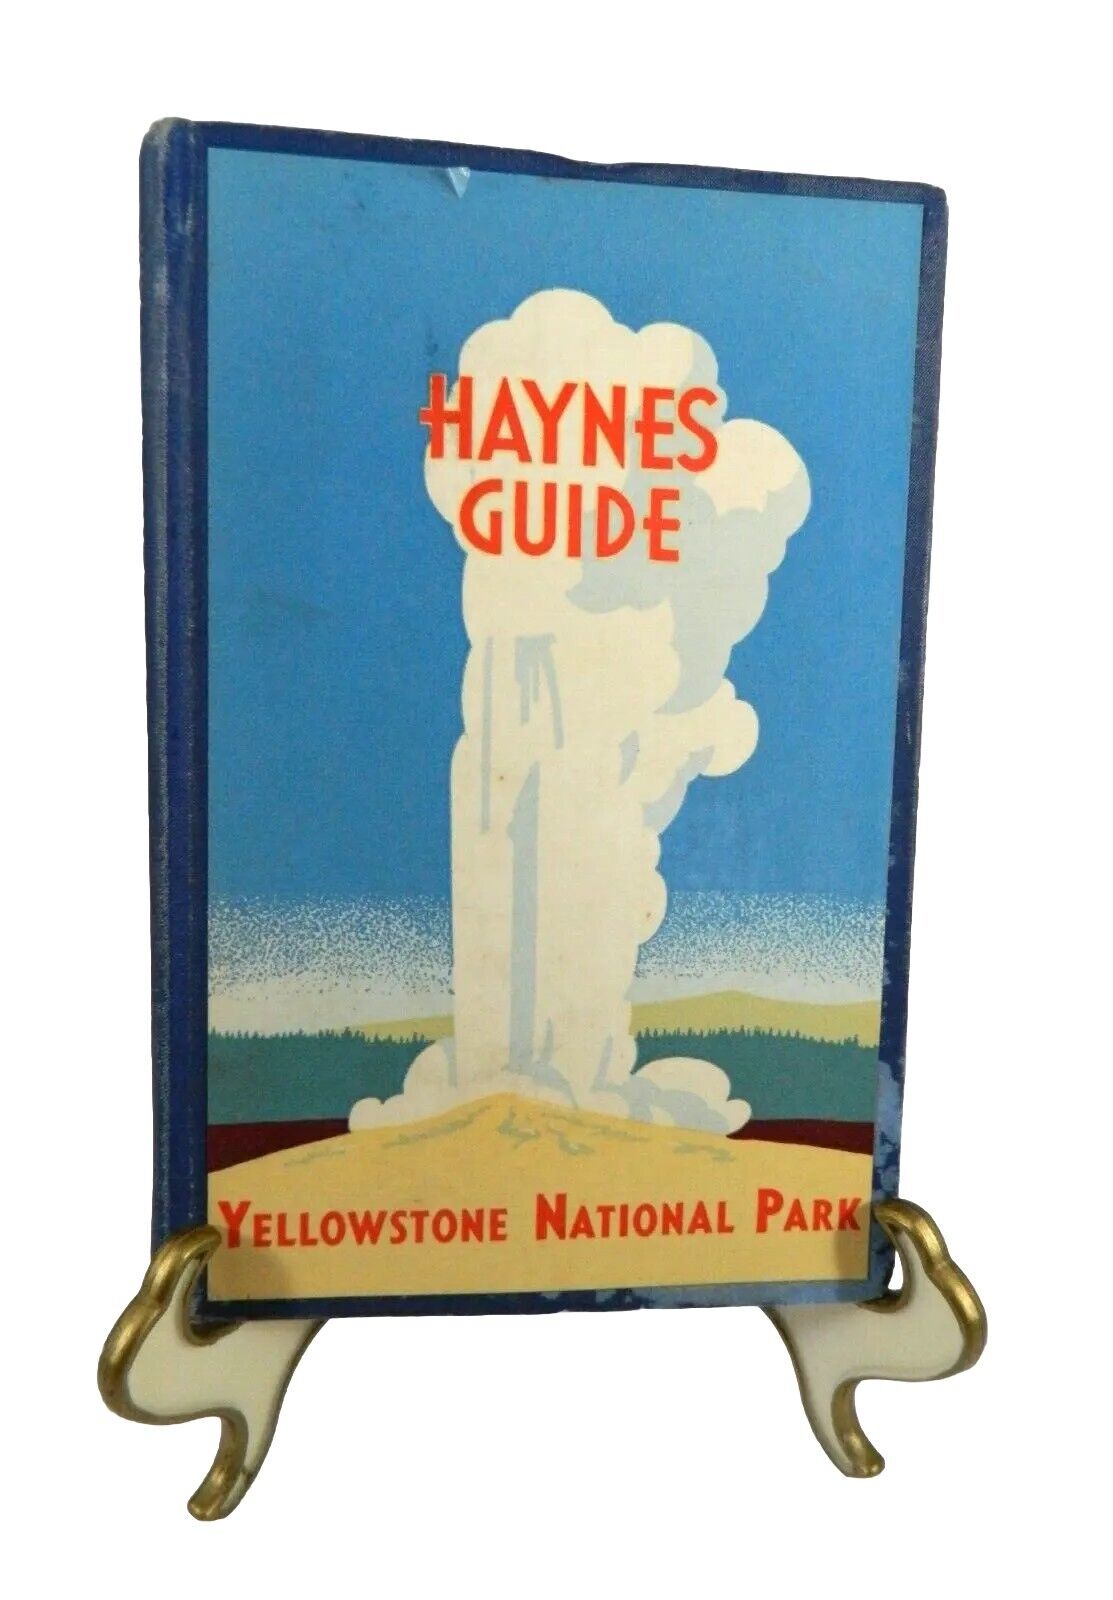 Haynes Guide Yellowstone National Park 1940 Hardcover 46th Edition w foldout Map